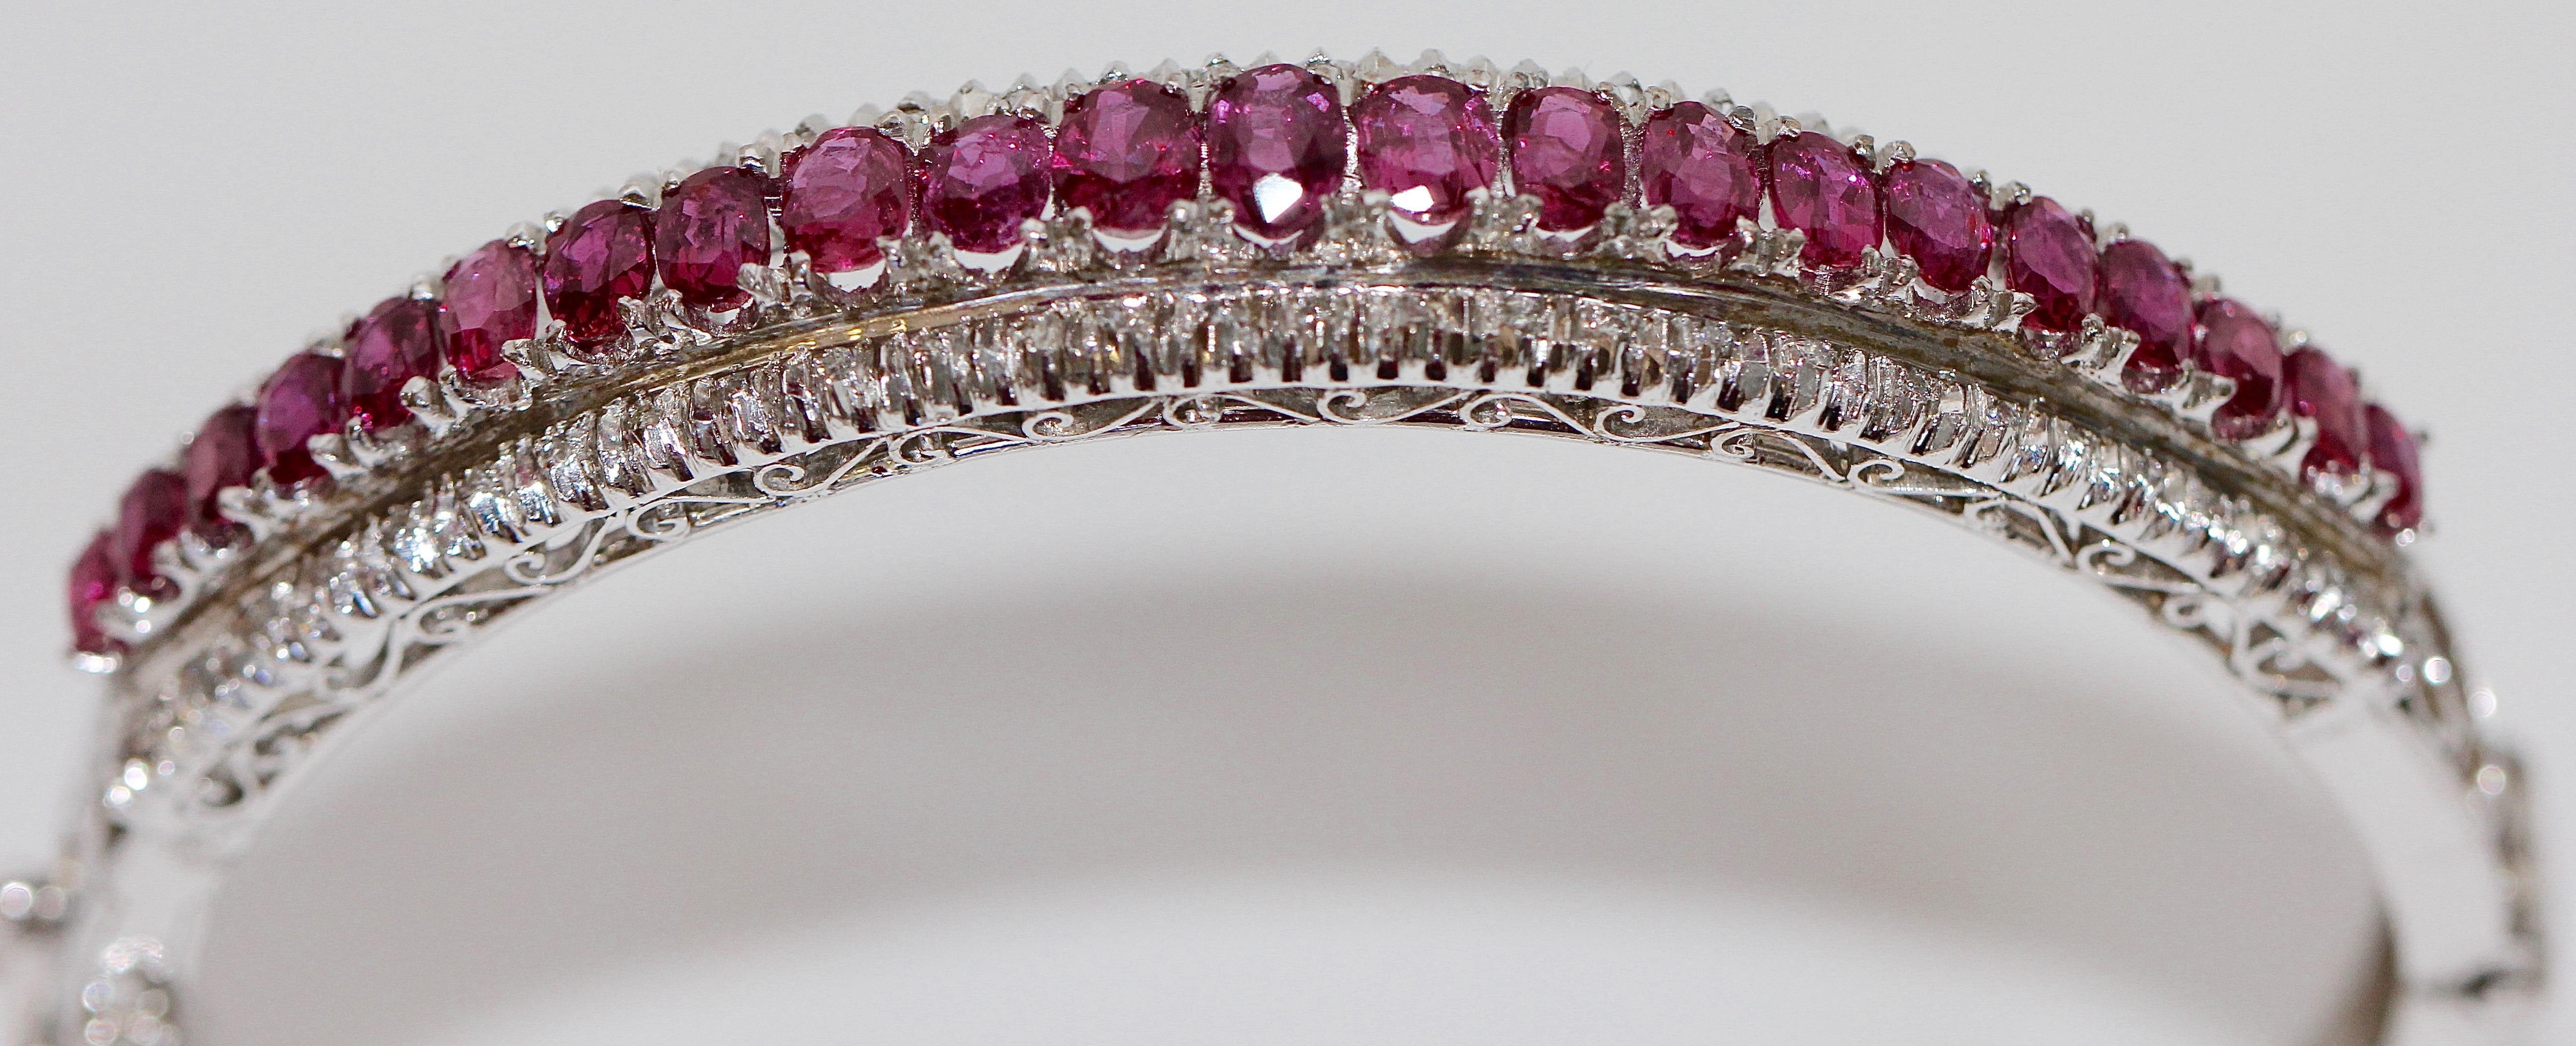 Pretty white gold bracelet set with lots of rubies and tiny diamonds.